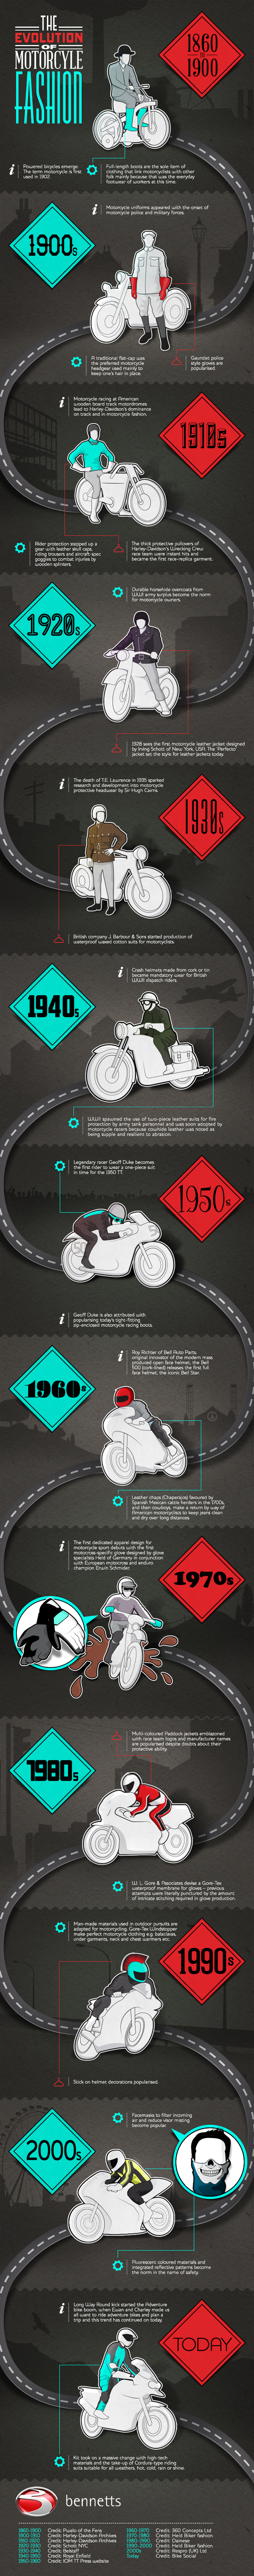 The Evolution of Motorcycle Fashion Infographic